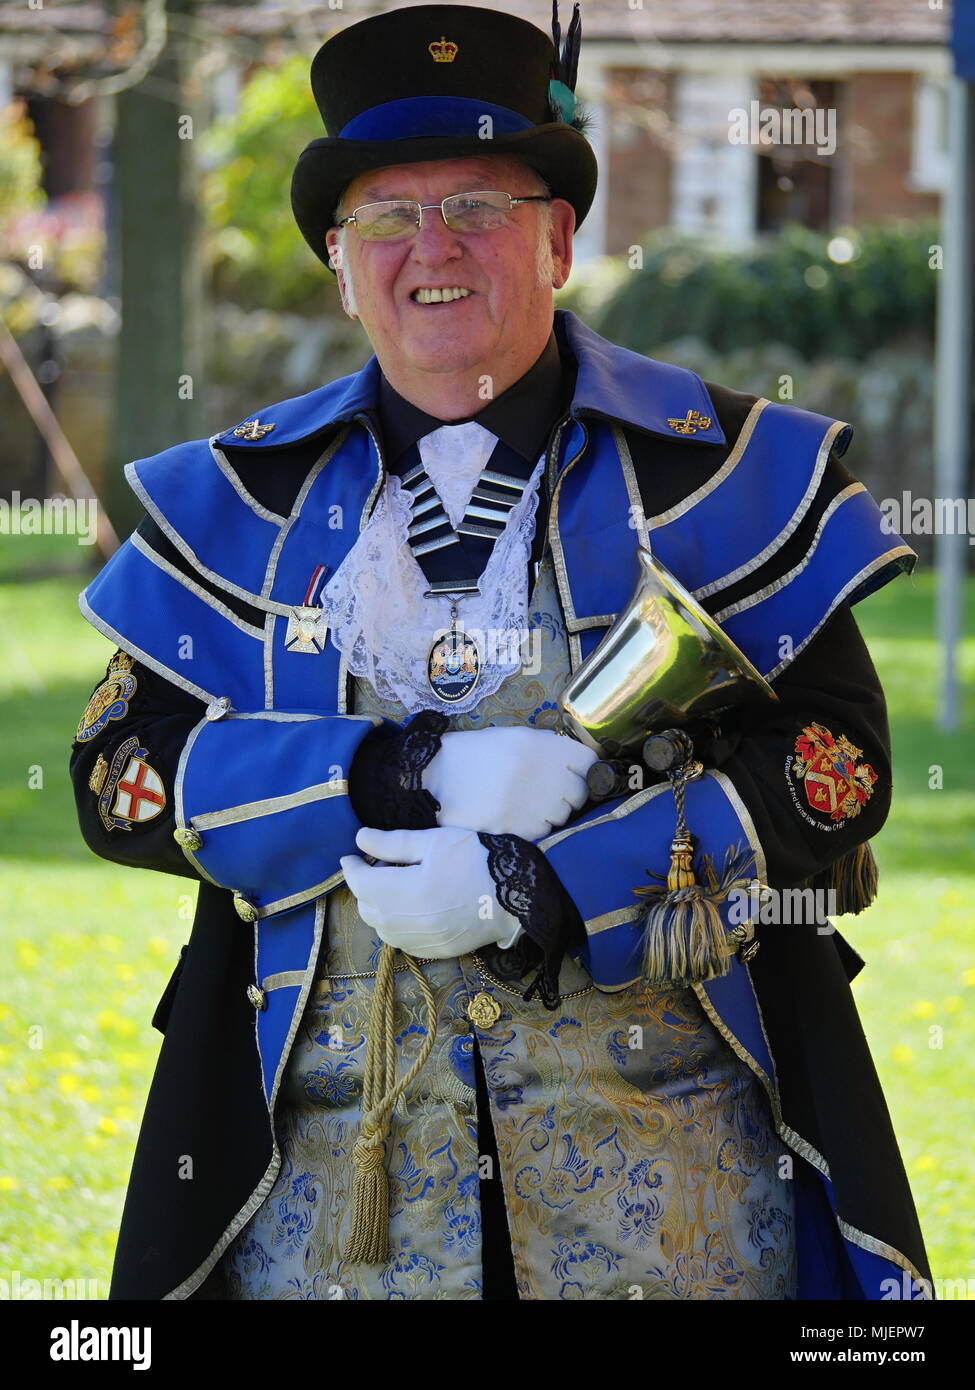 Bromyard, UK. 5th May, 2018. The Bromyard Town Criers Competition held on 5th May 2018 in Bromyard, Herefordshire. UK. Only 8 competitors from towns around Britain took part this year -  the numbers are dwindling as the criers grow older with no new blood to replace them. Credit: Richard Sheppard/Alamy Live News Stock Photo